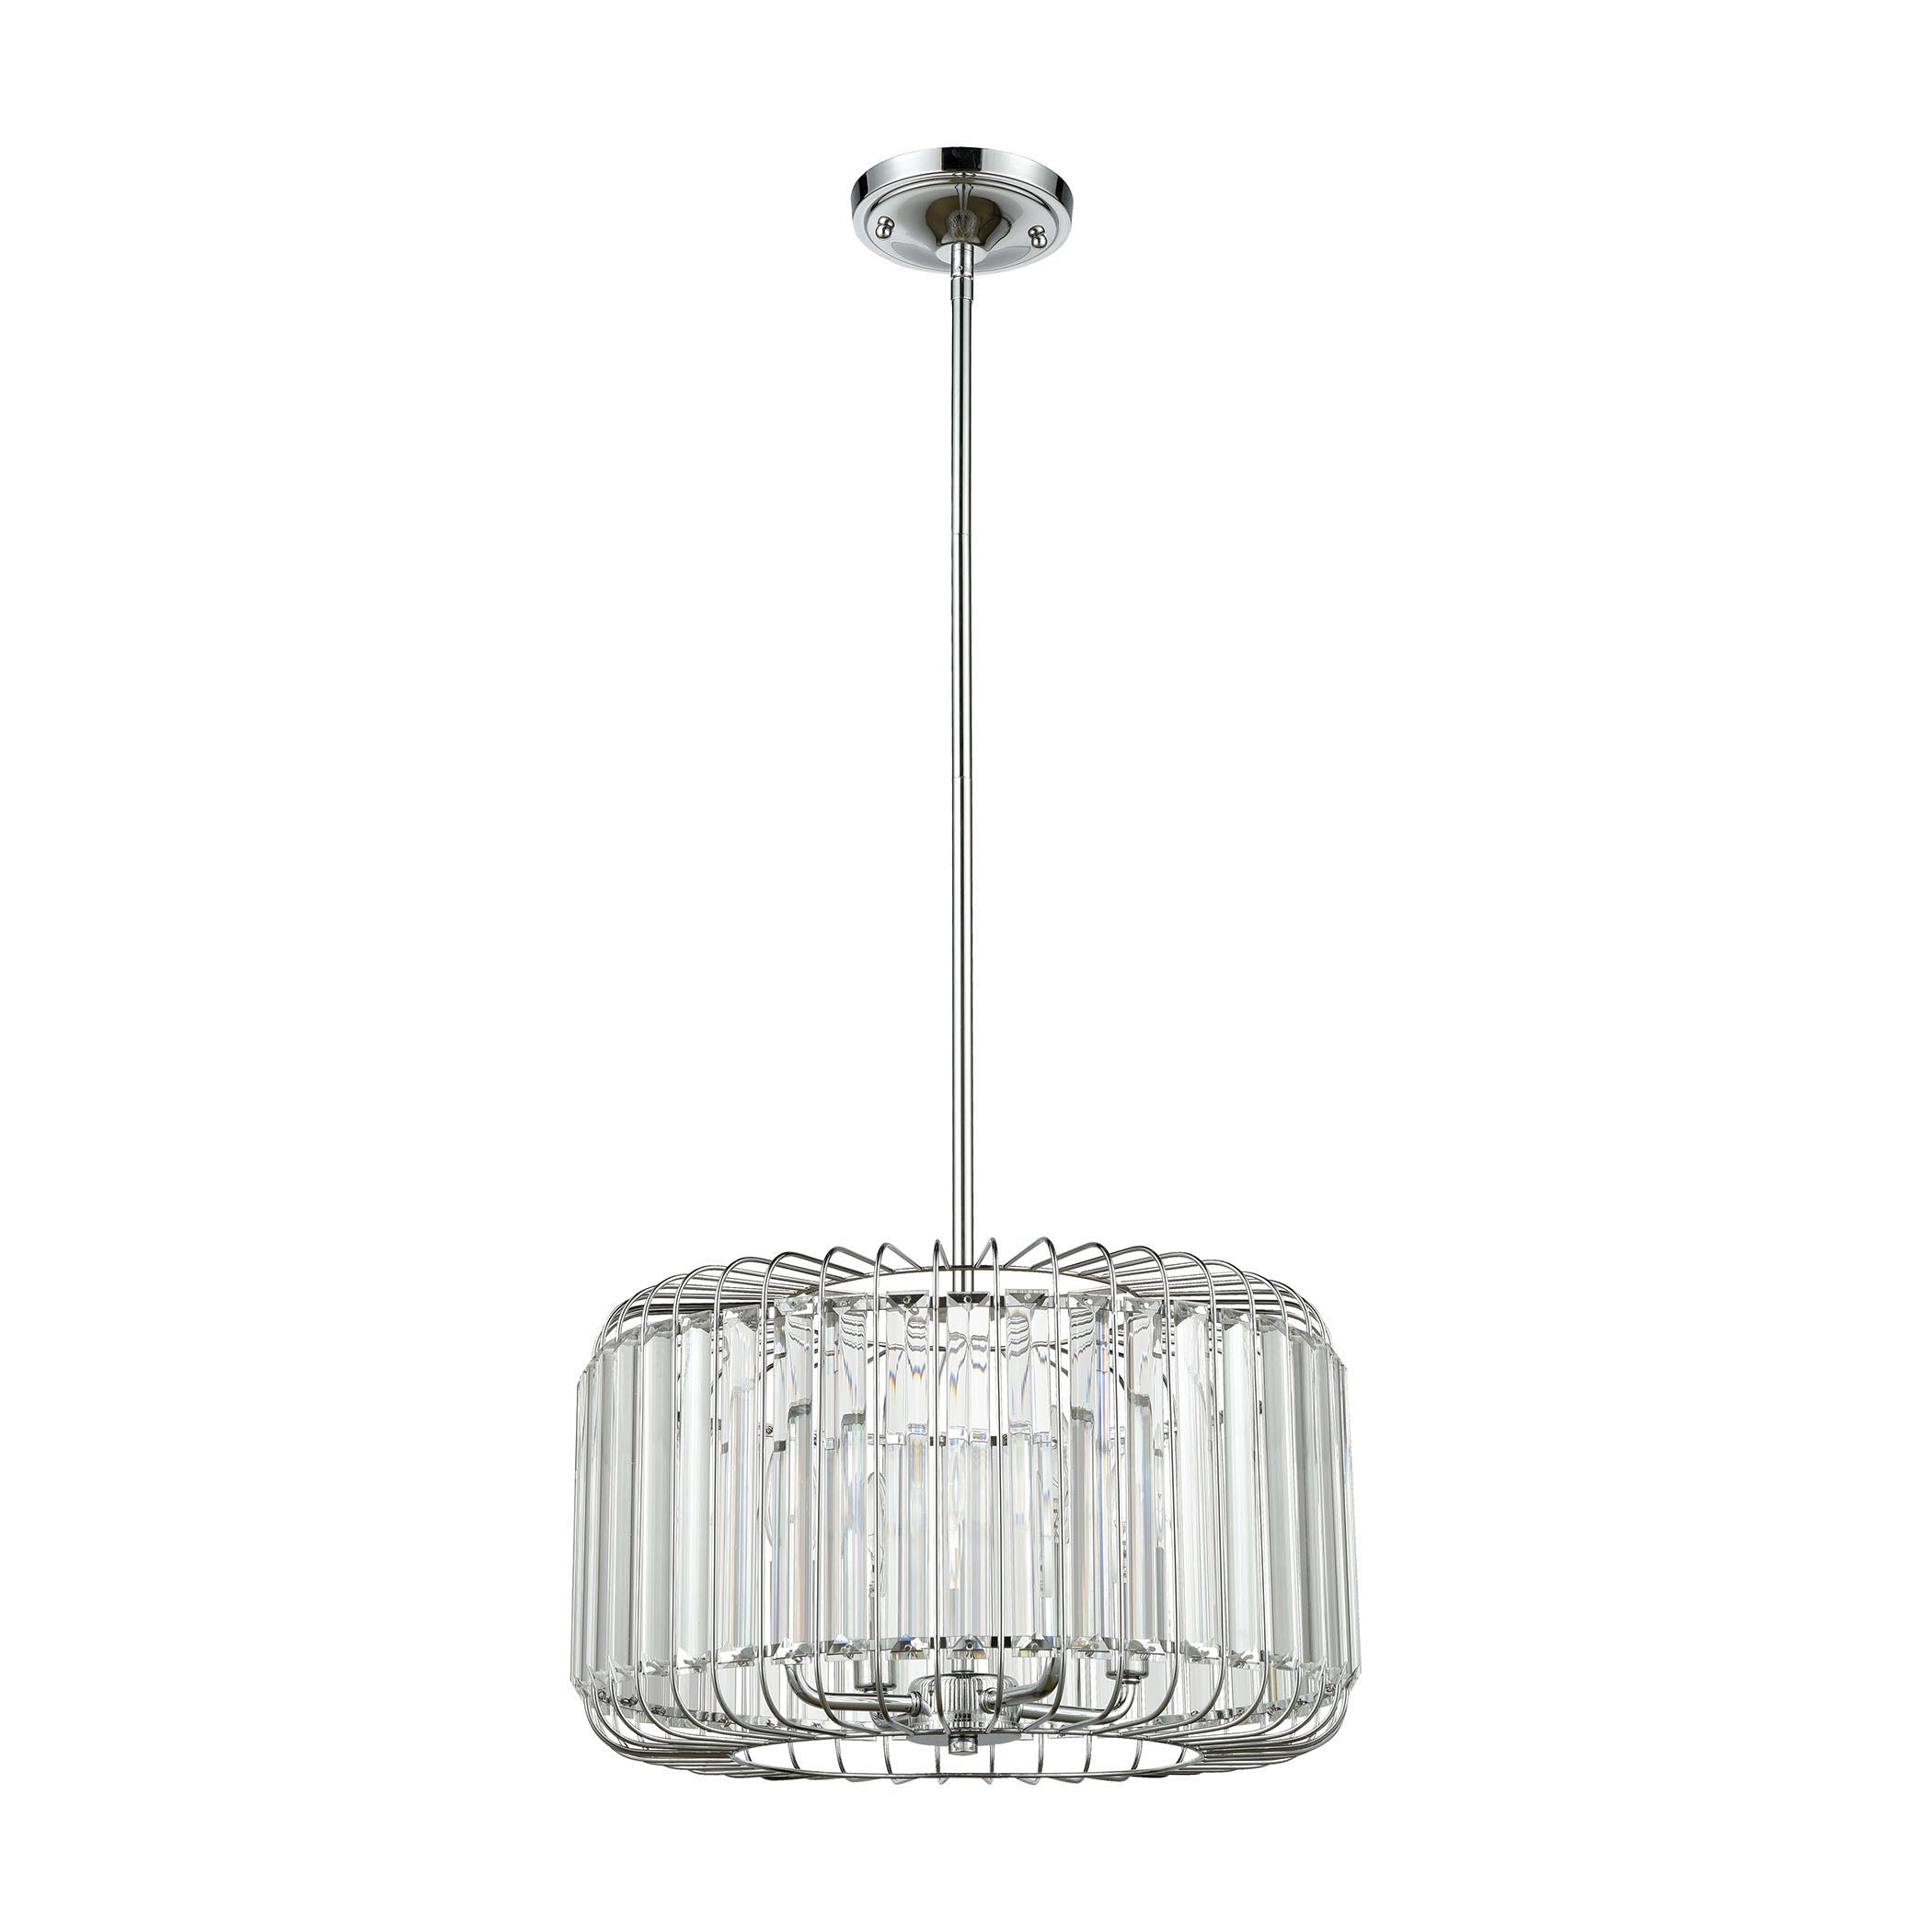 ELK Lighting 81324/4 Beaumont 4-Light Chandelier in Polished Chrome with Clear Crystal